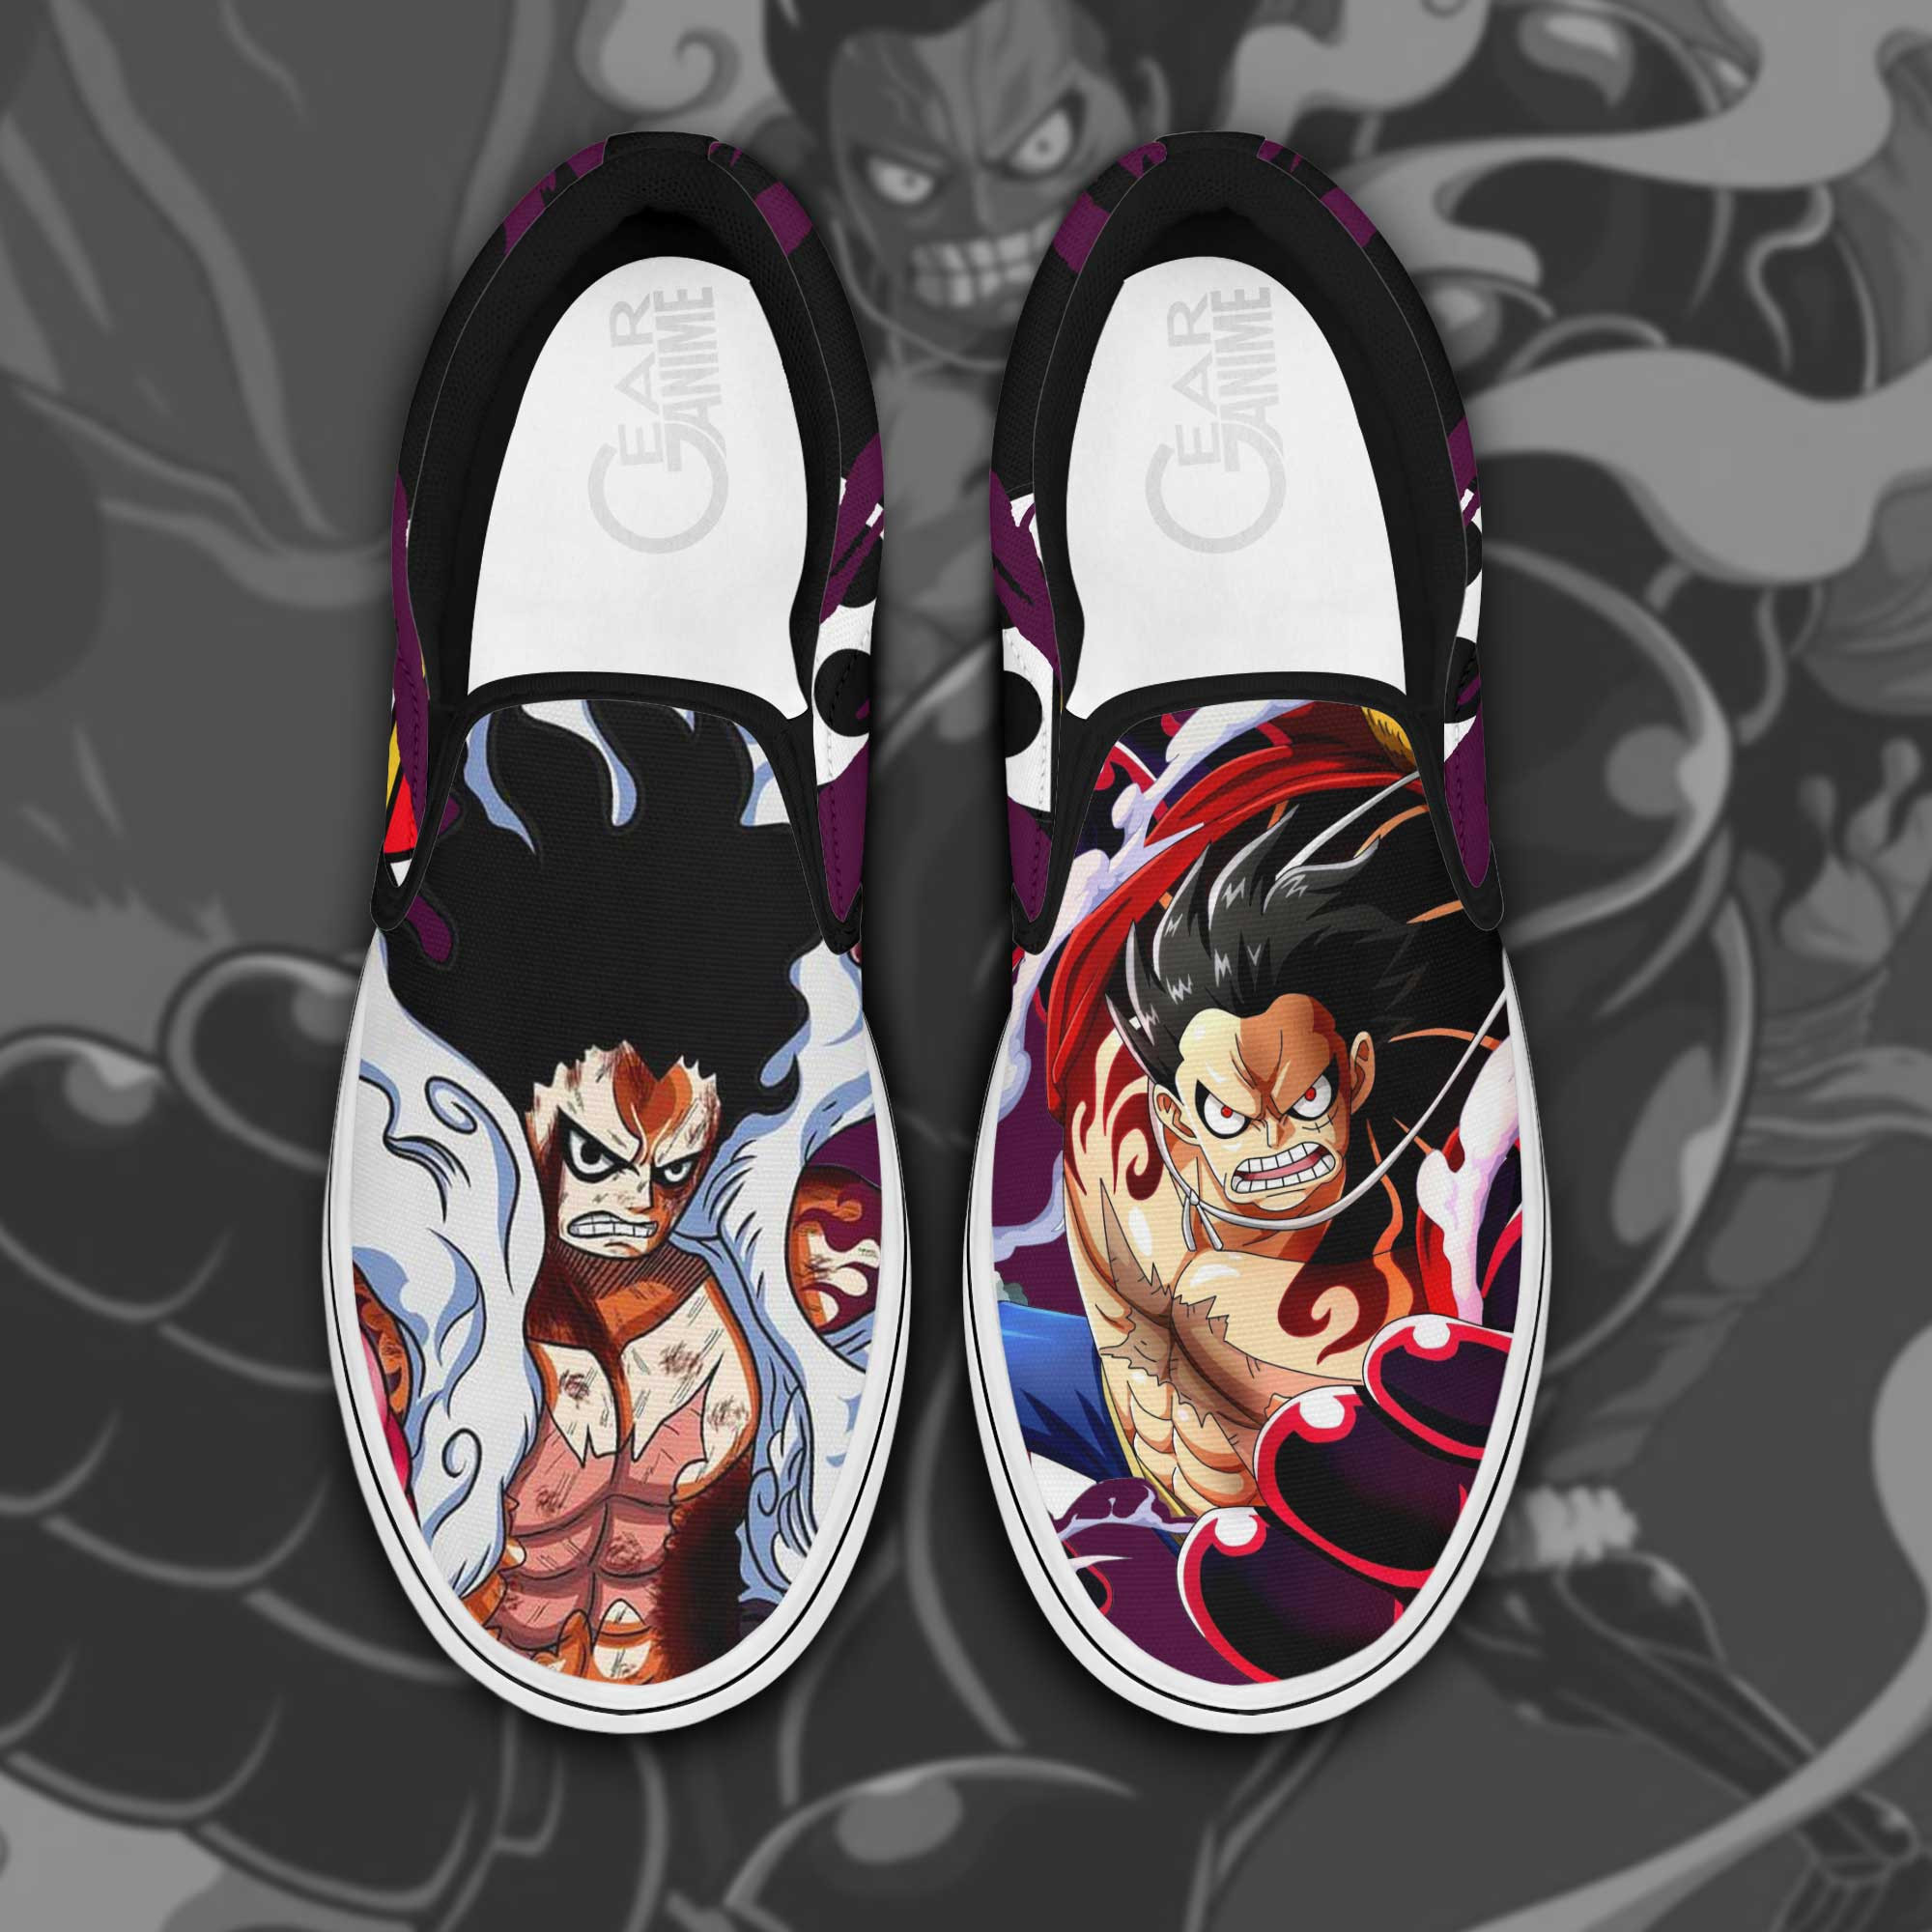 These Sneakers are a must-have for any Anime fan 2